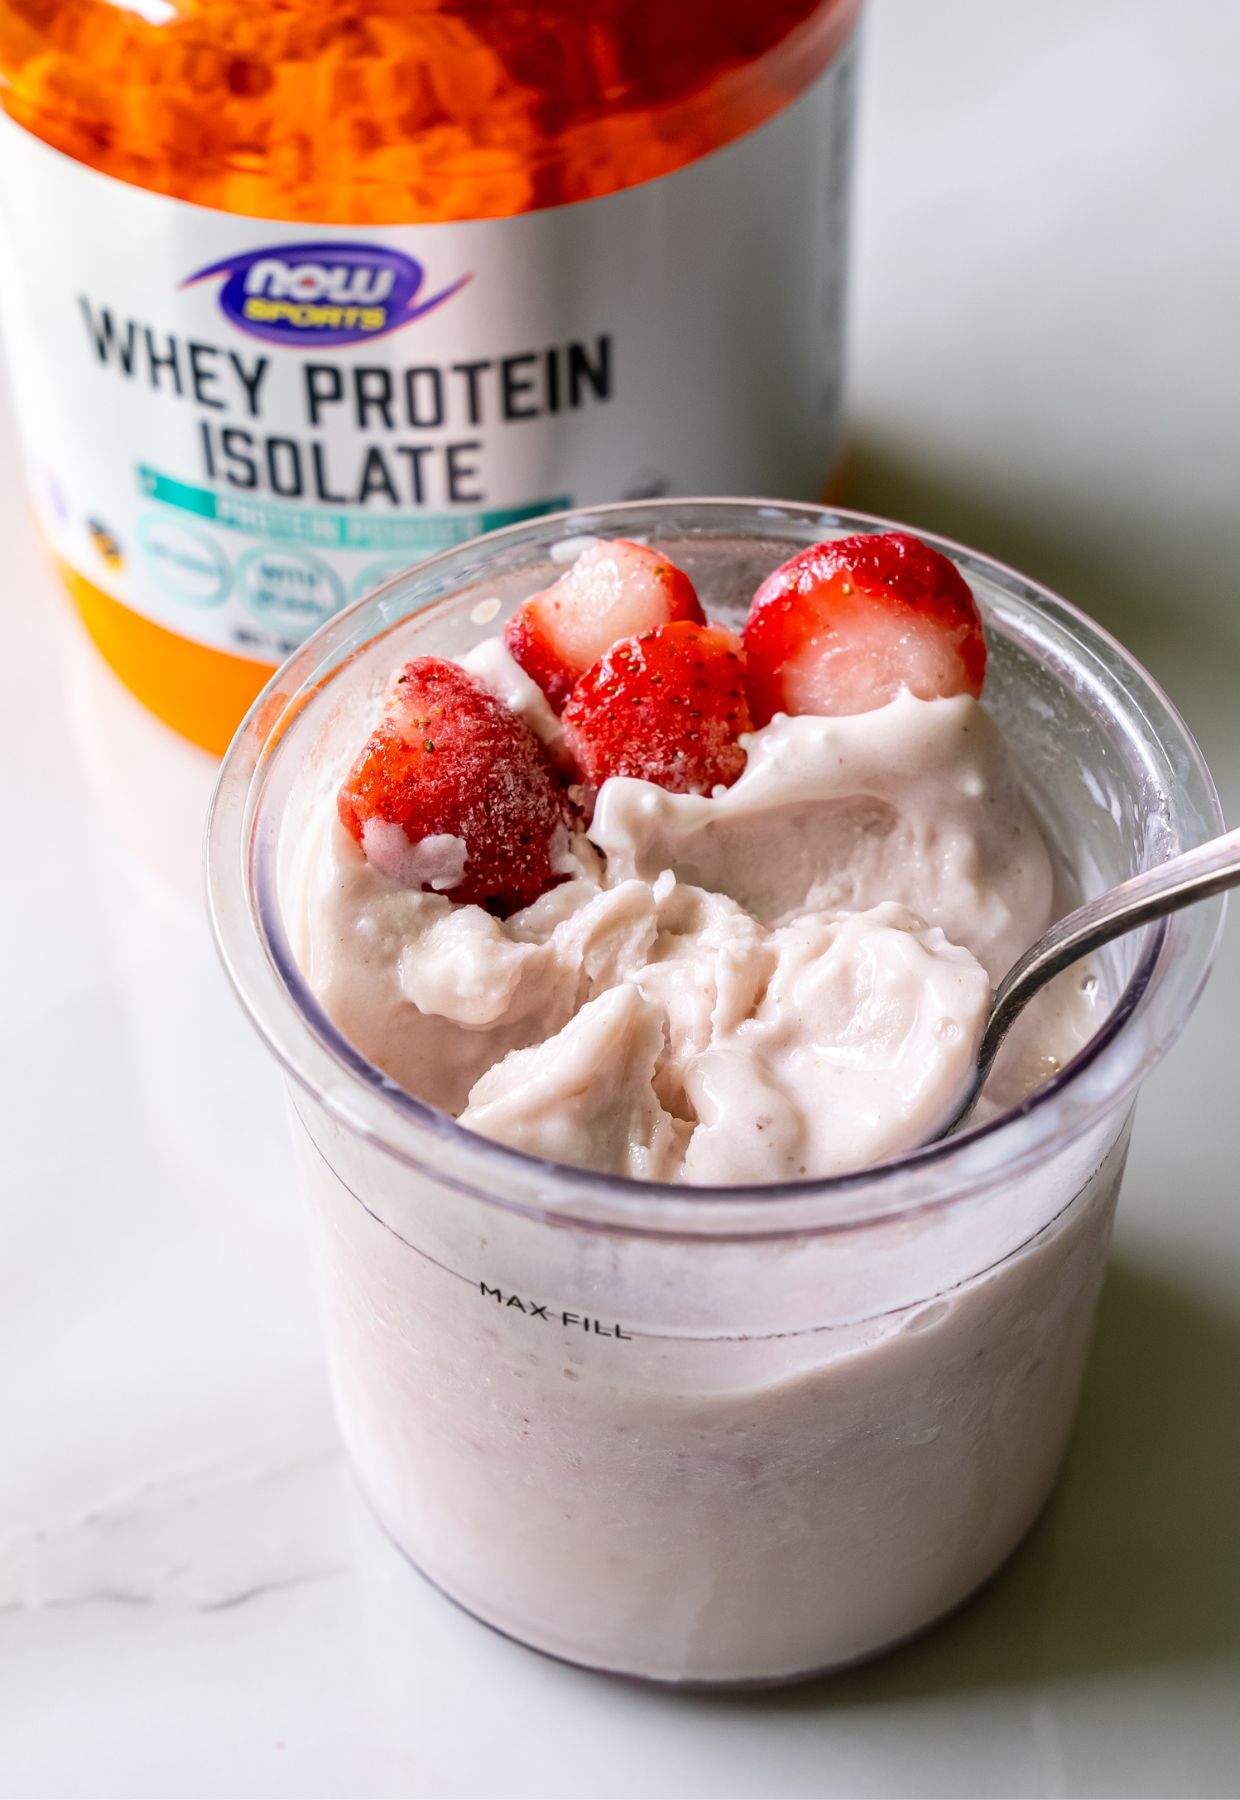 A container of whey protein isolate with a bowl of creamy yogurt topped with sliced strawberries and a spoon.